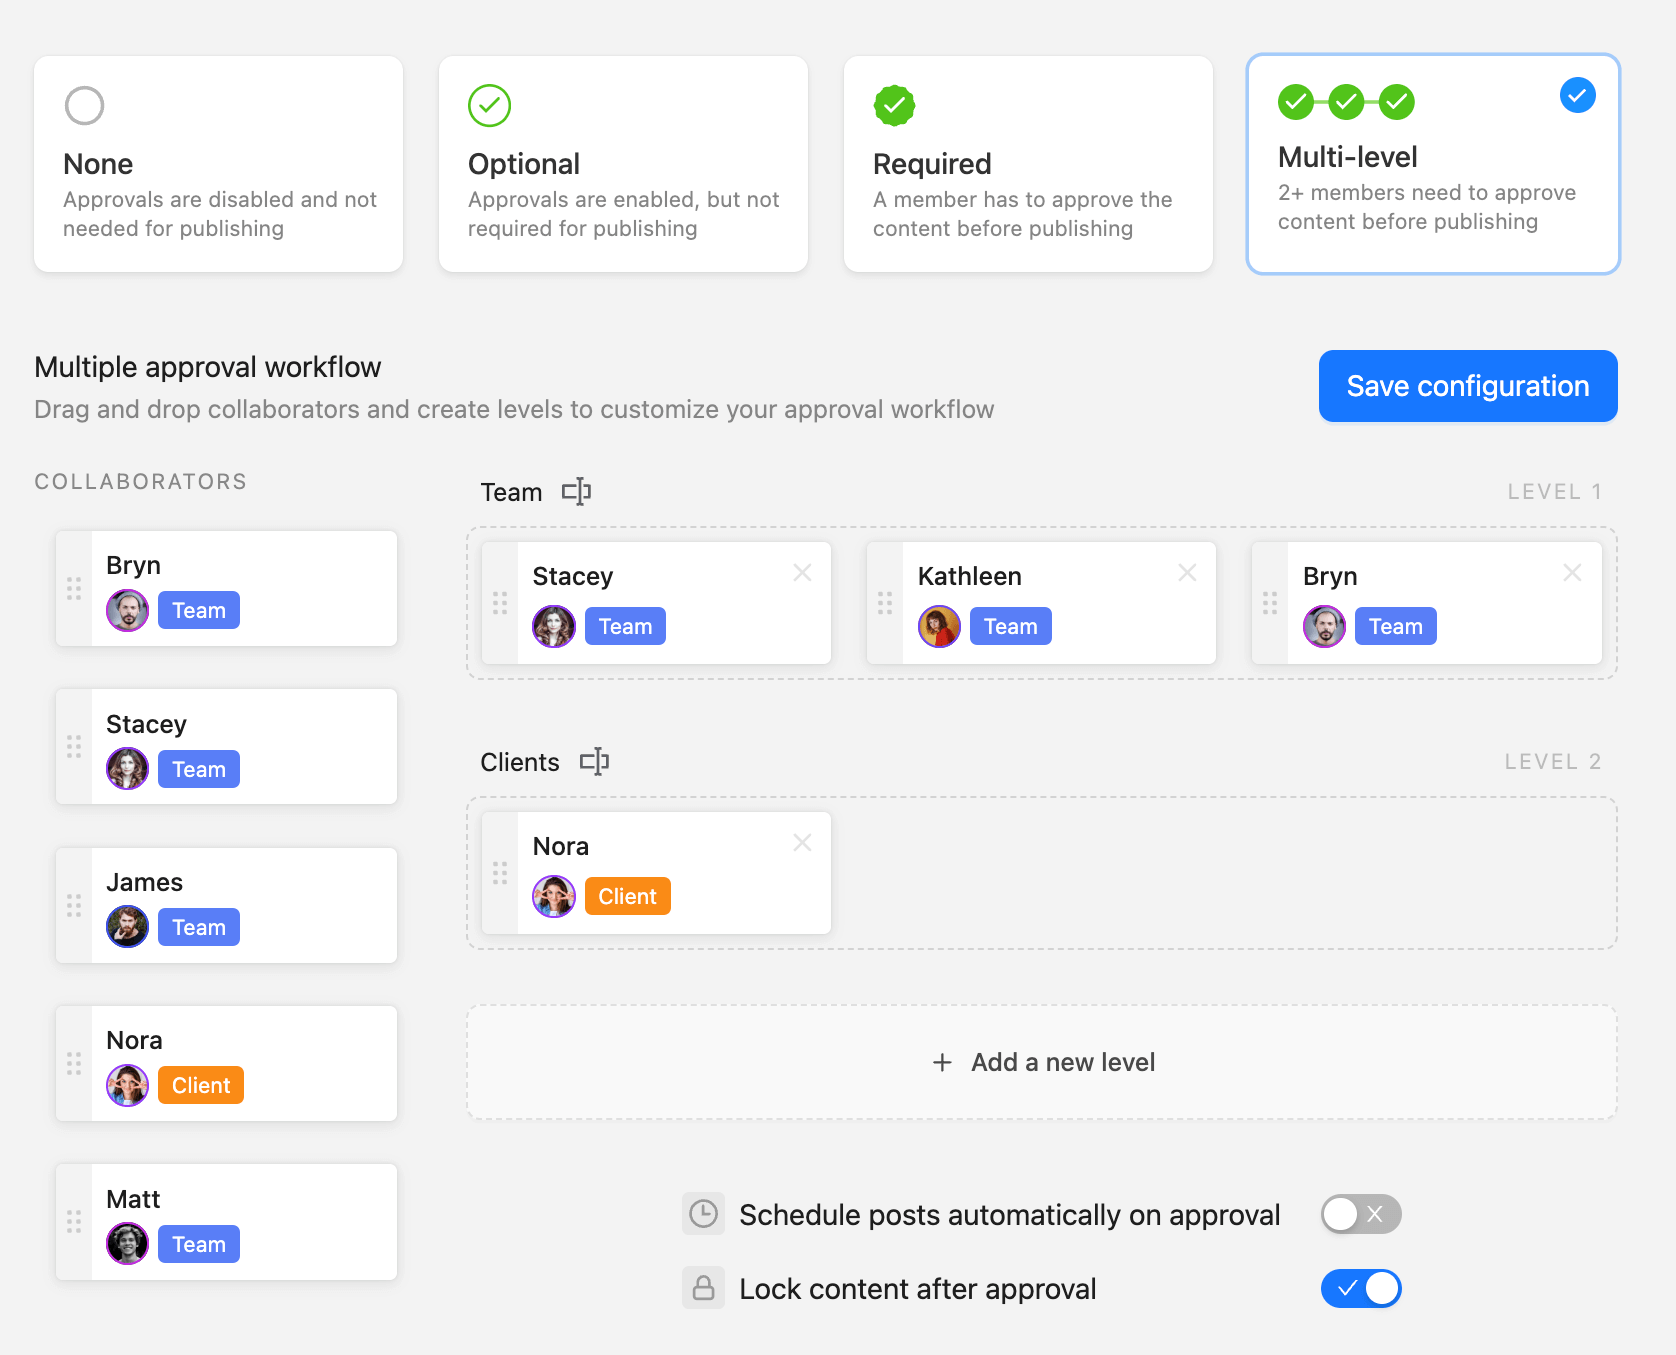 Multiple approval workflow configuration screen with options for team and client collaborators, including settings for post scheduling and content locking.